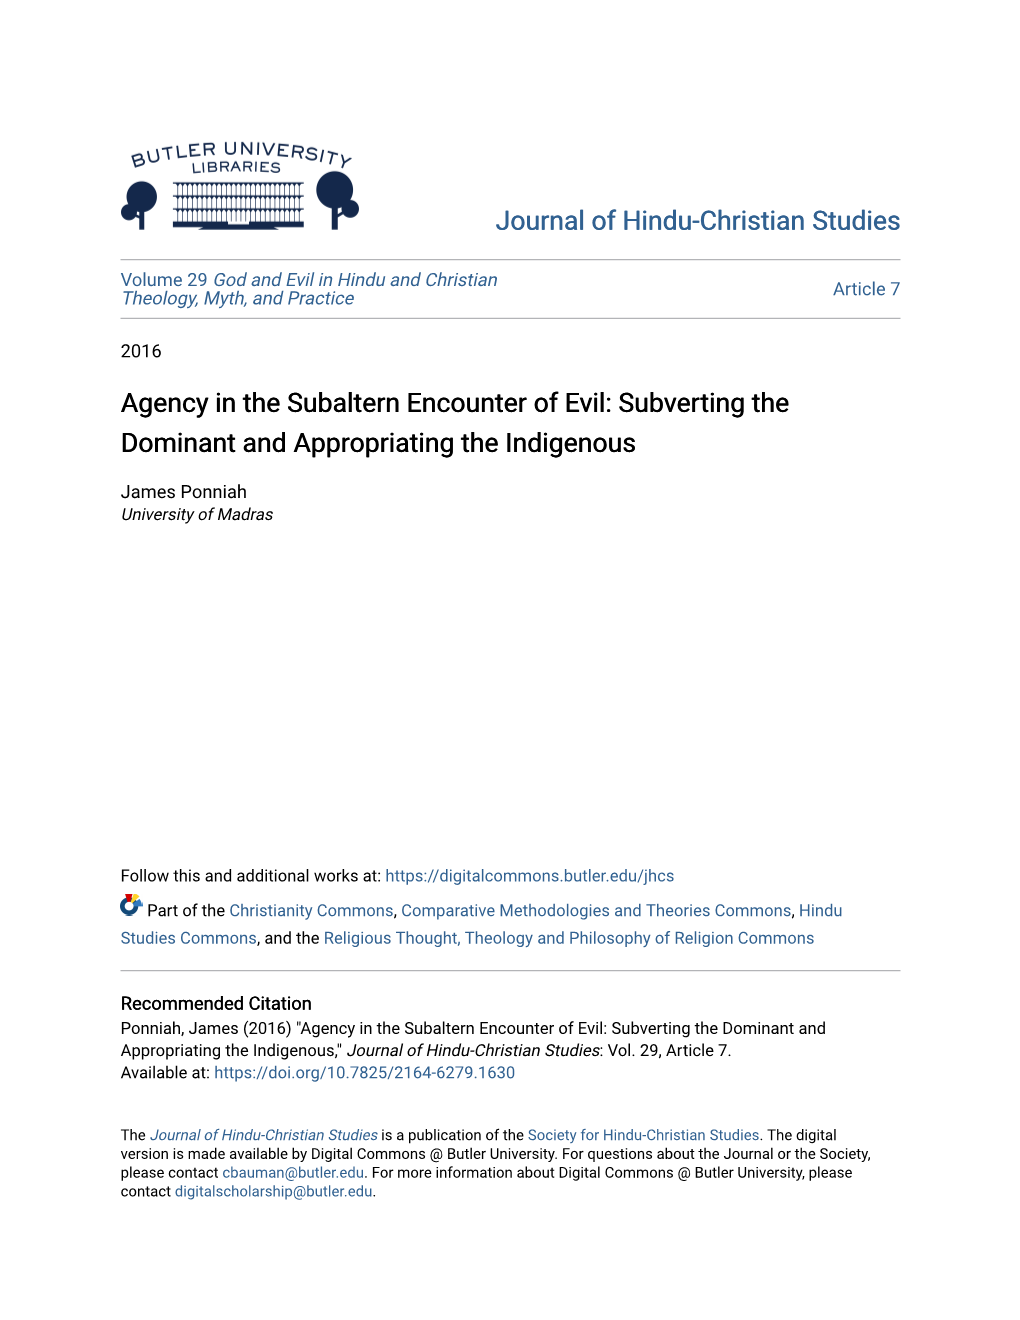 Agency in the Subaltern Encounter of Evil: Subverting the Dominant and Appropriating the Indigenous